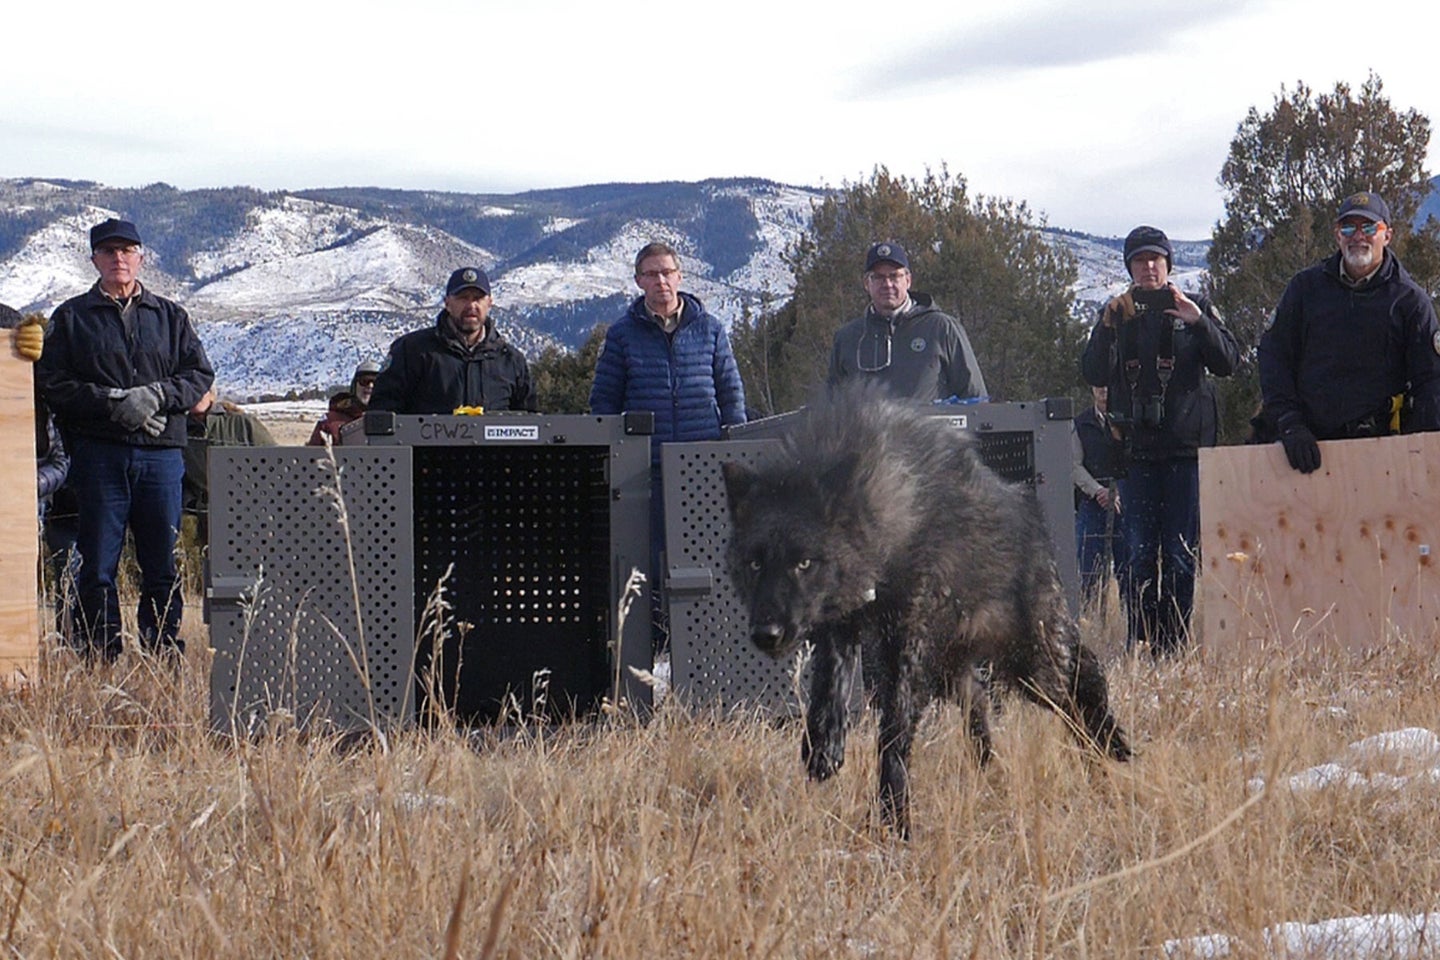 Colorado's newly transplanted wolves were captured from packs in Oregon.